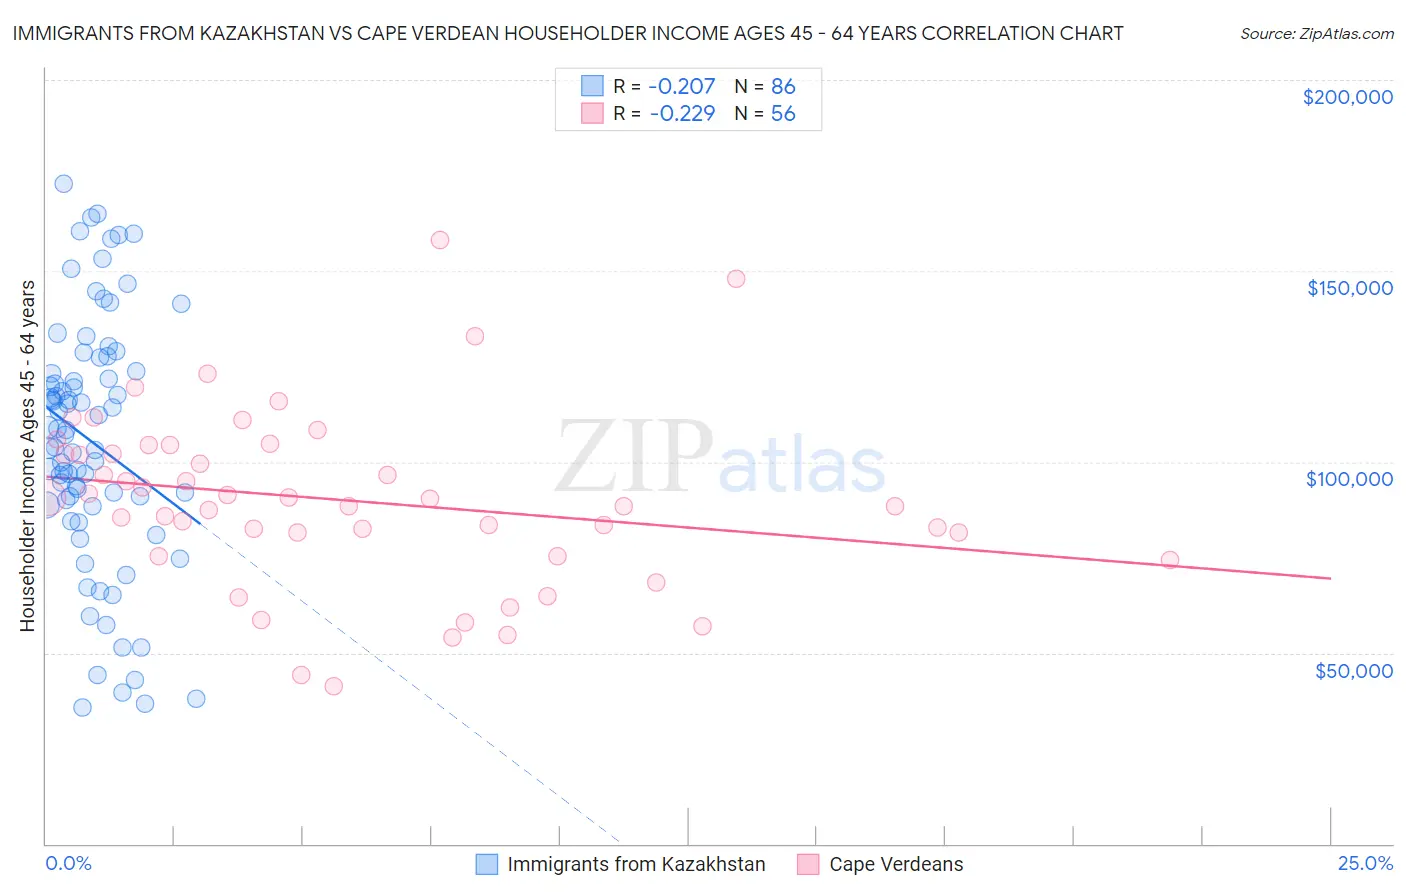 Immigrants from Kazakhstan vs Cape Verdean Householder Income Ages 45 - 64 years